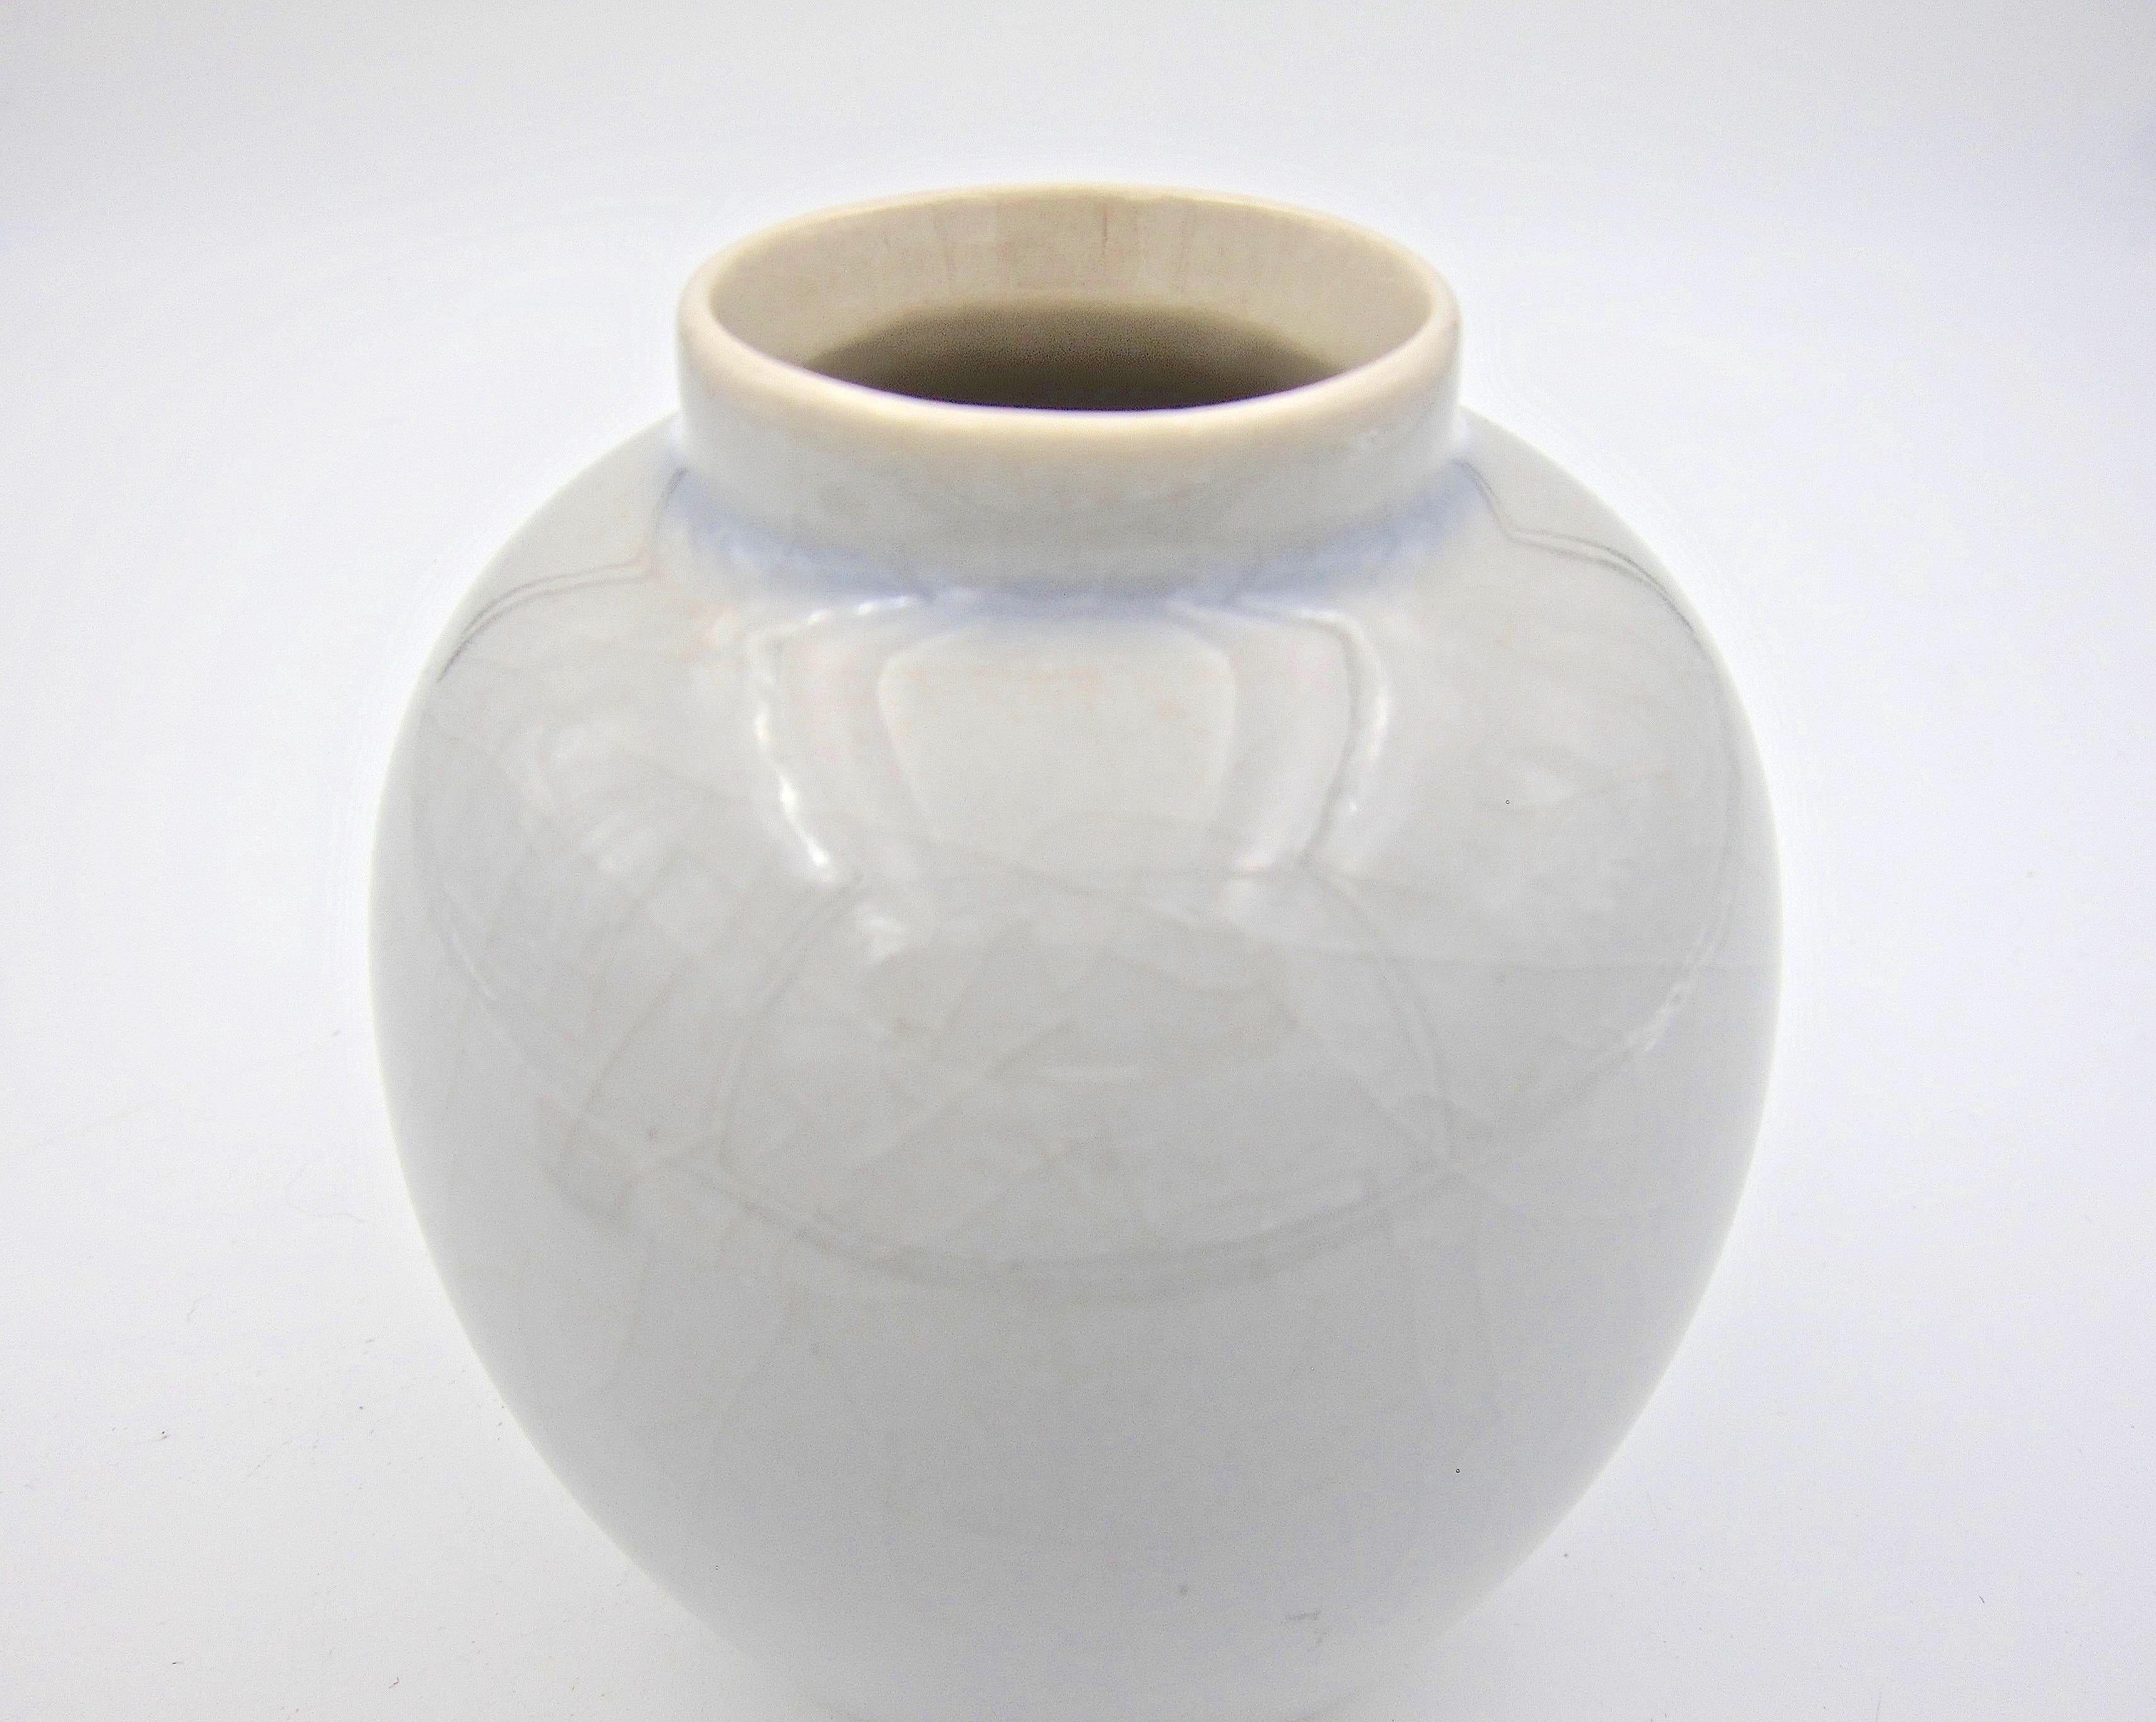 20th Century American Porcelain Ginger Jar with Craquelure Glaze by Rodney Rouse